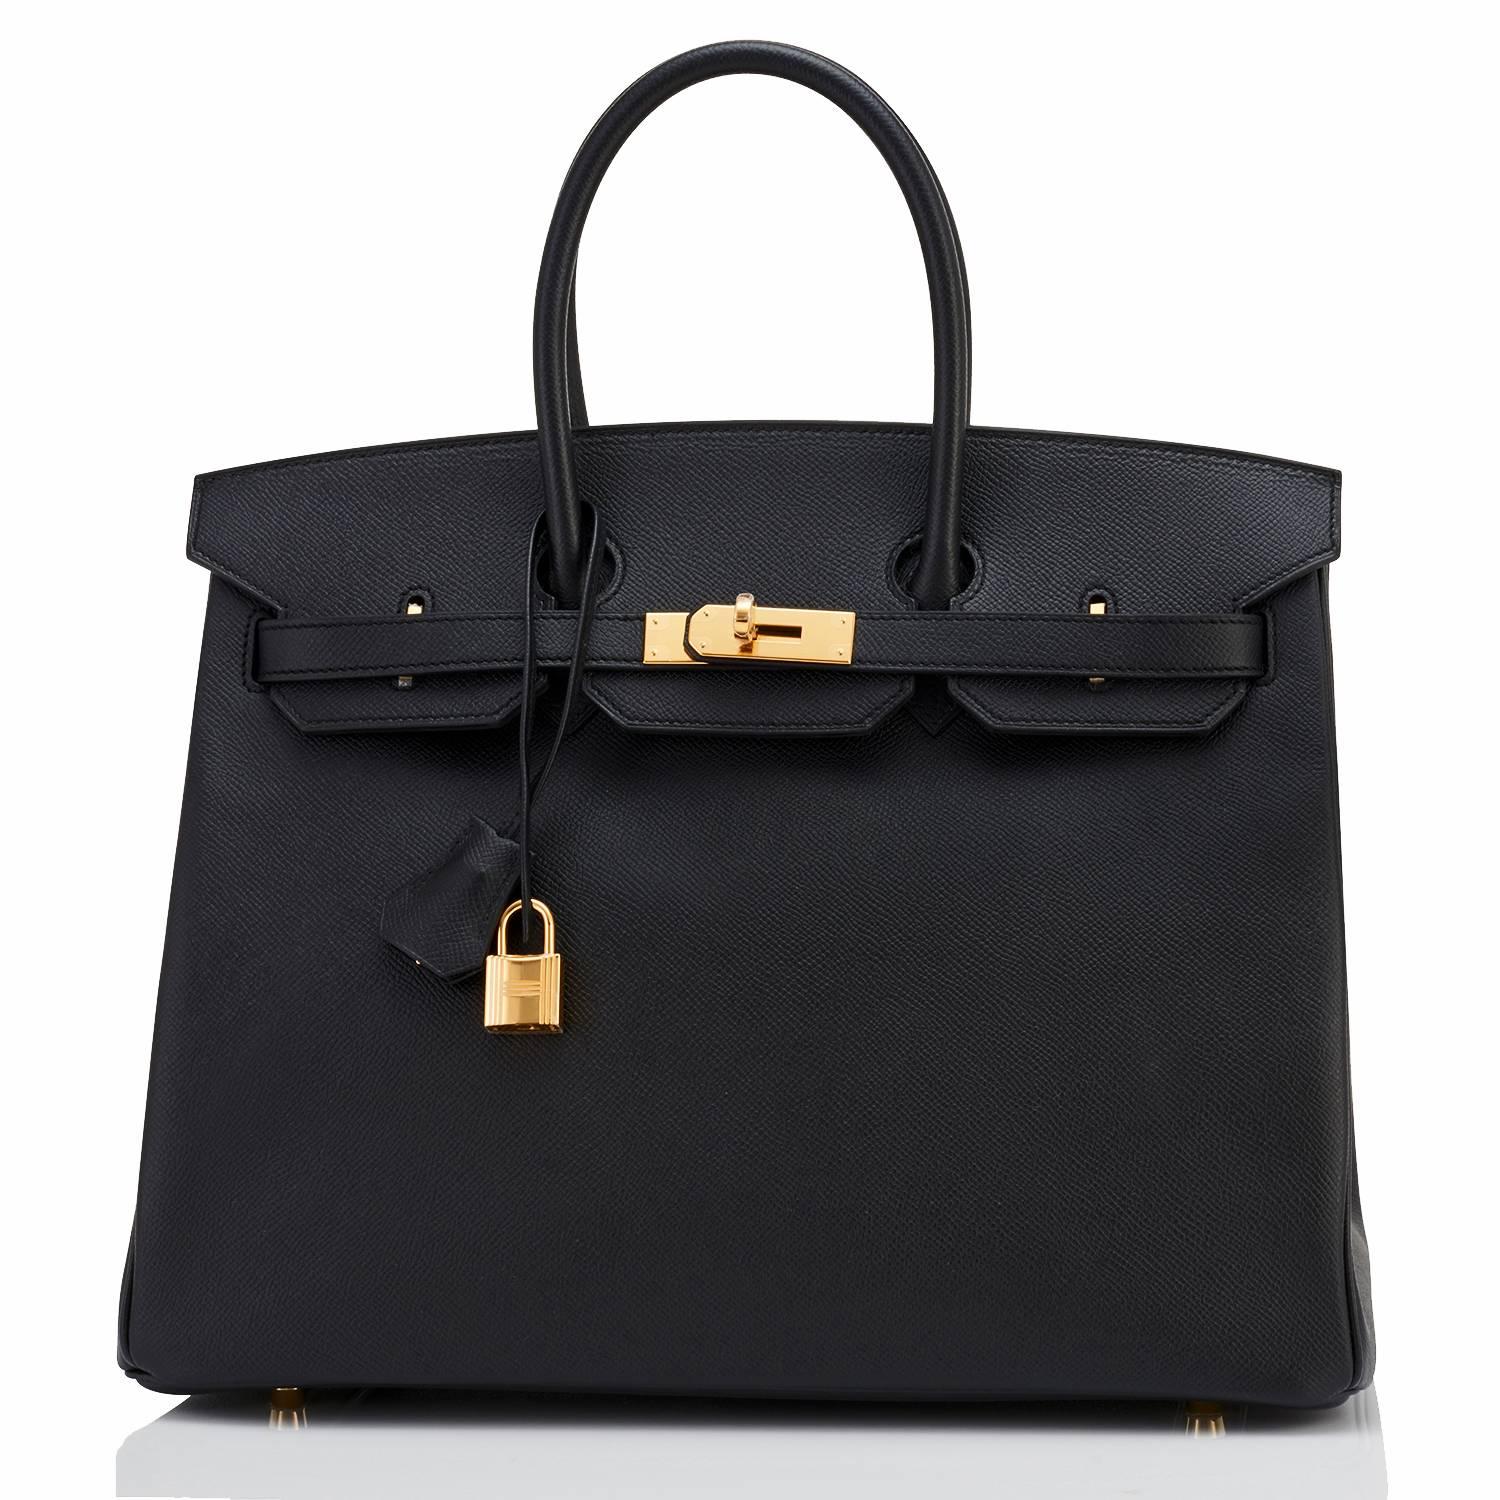 Hermes Black 35cm Birkin Gold Hardware Epsom Bag Power Birkin
Brand new in box. Store Fresh.  Pristine condition (with plastic on hardware).
Just purchased from Hermes store; bag bears new 2017 interior A stamp.
Perfect gift! Comes with keys, lock,